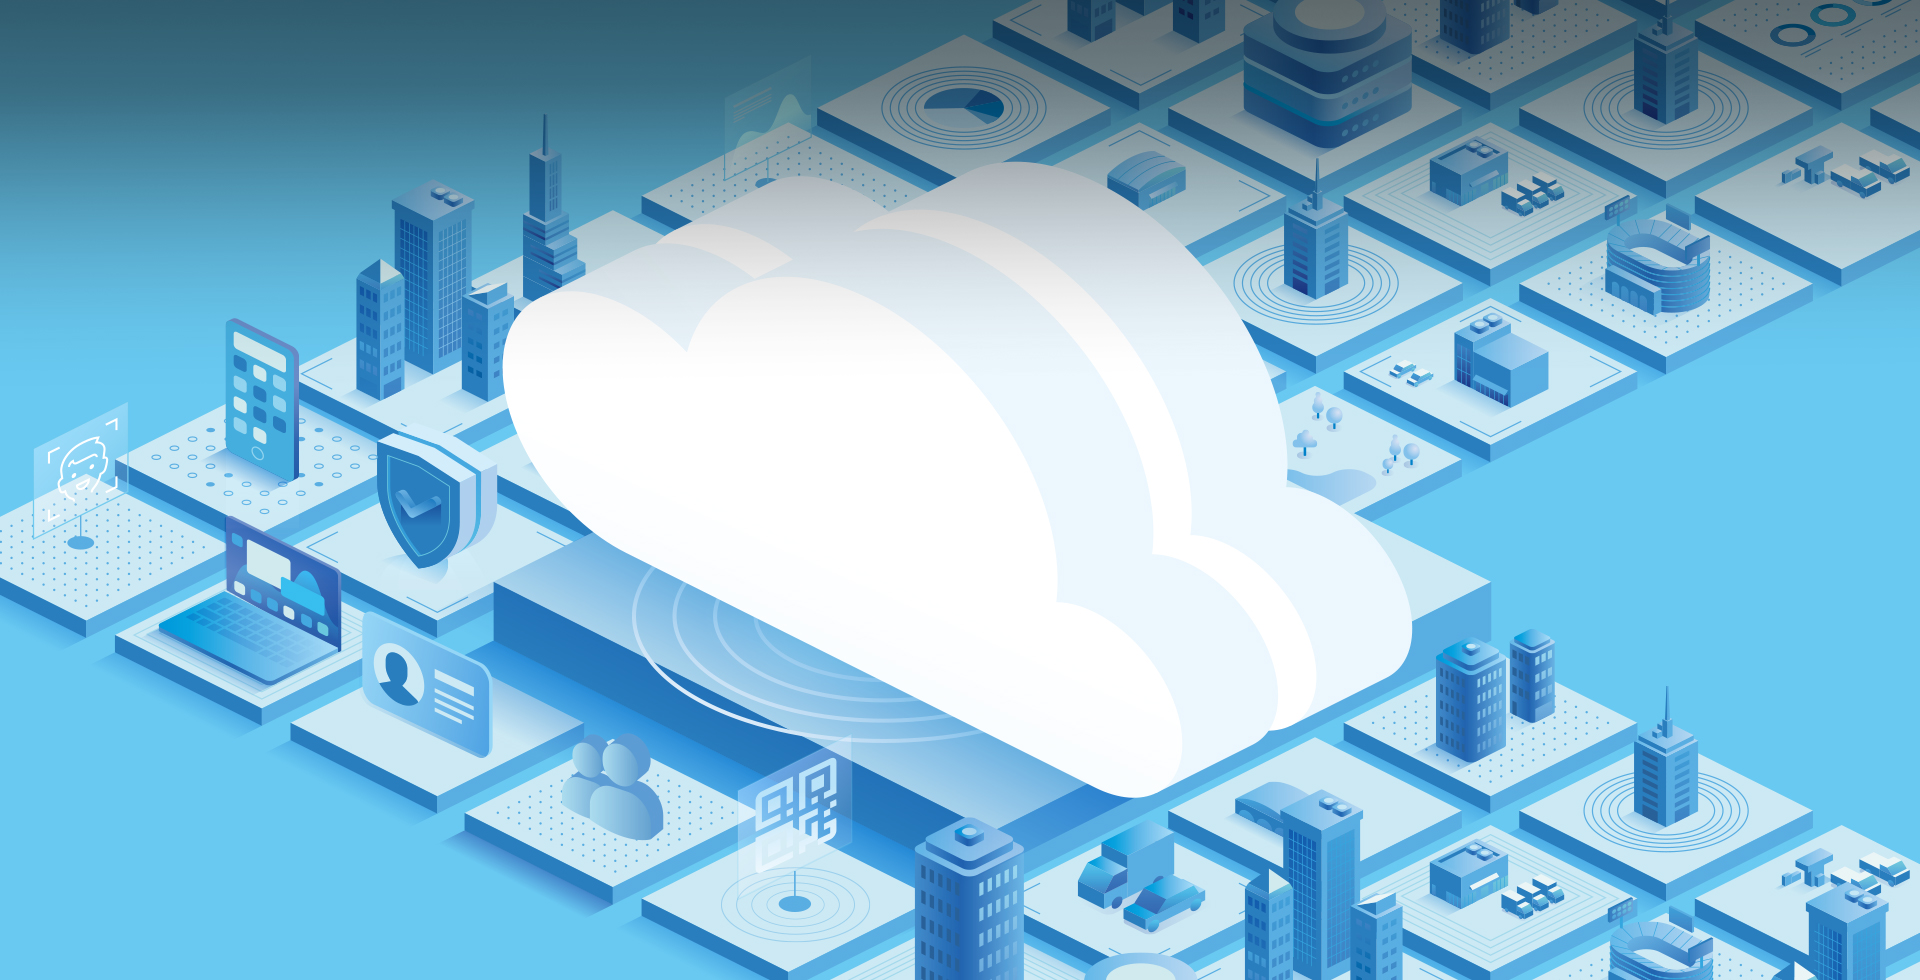 Suprema CLUE is built on a native cloud architecture, allowing devices to connect directly to cloud.